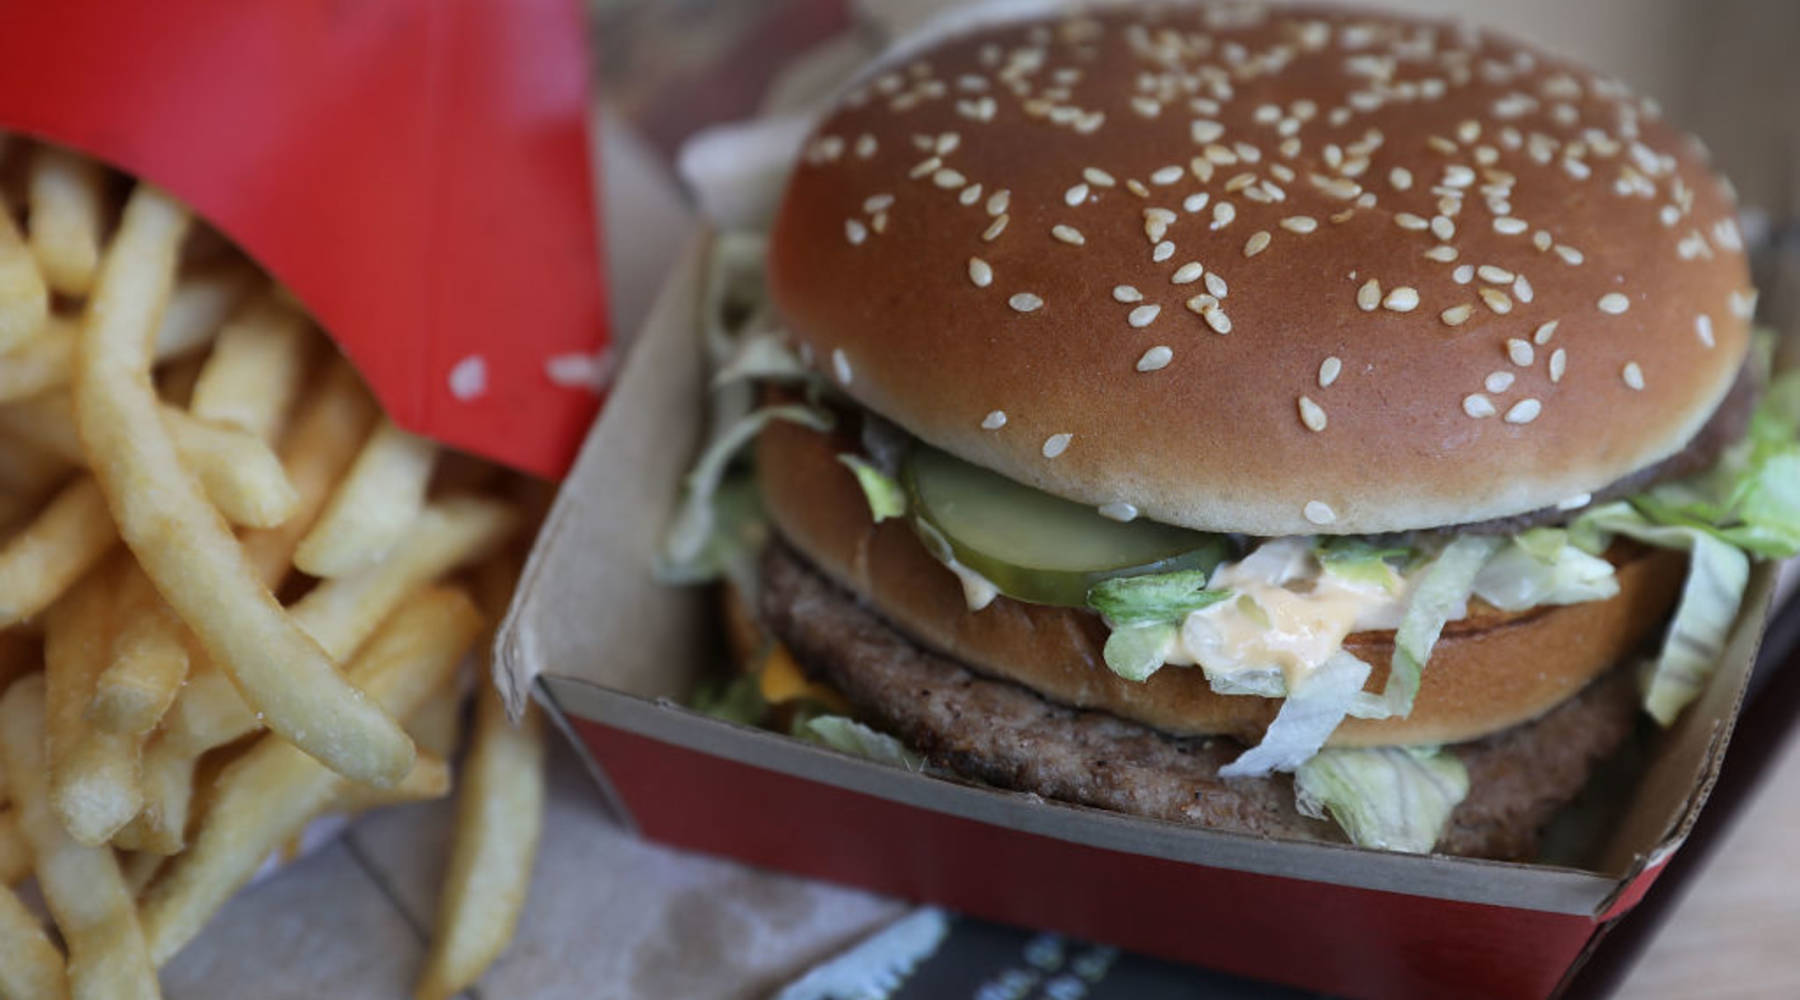 how much does a big mac cost in yuan in china